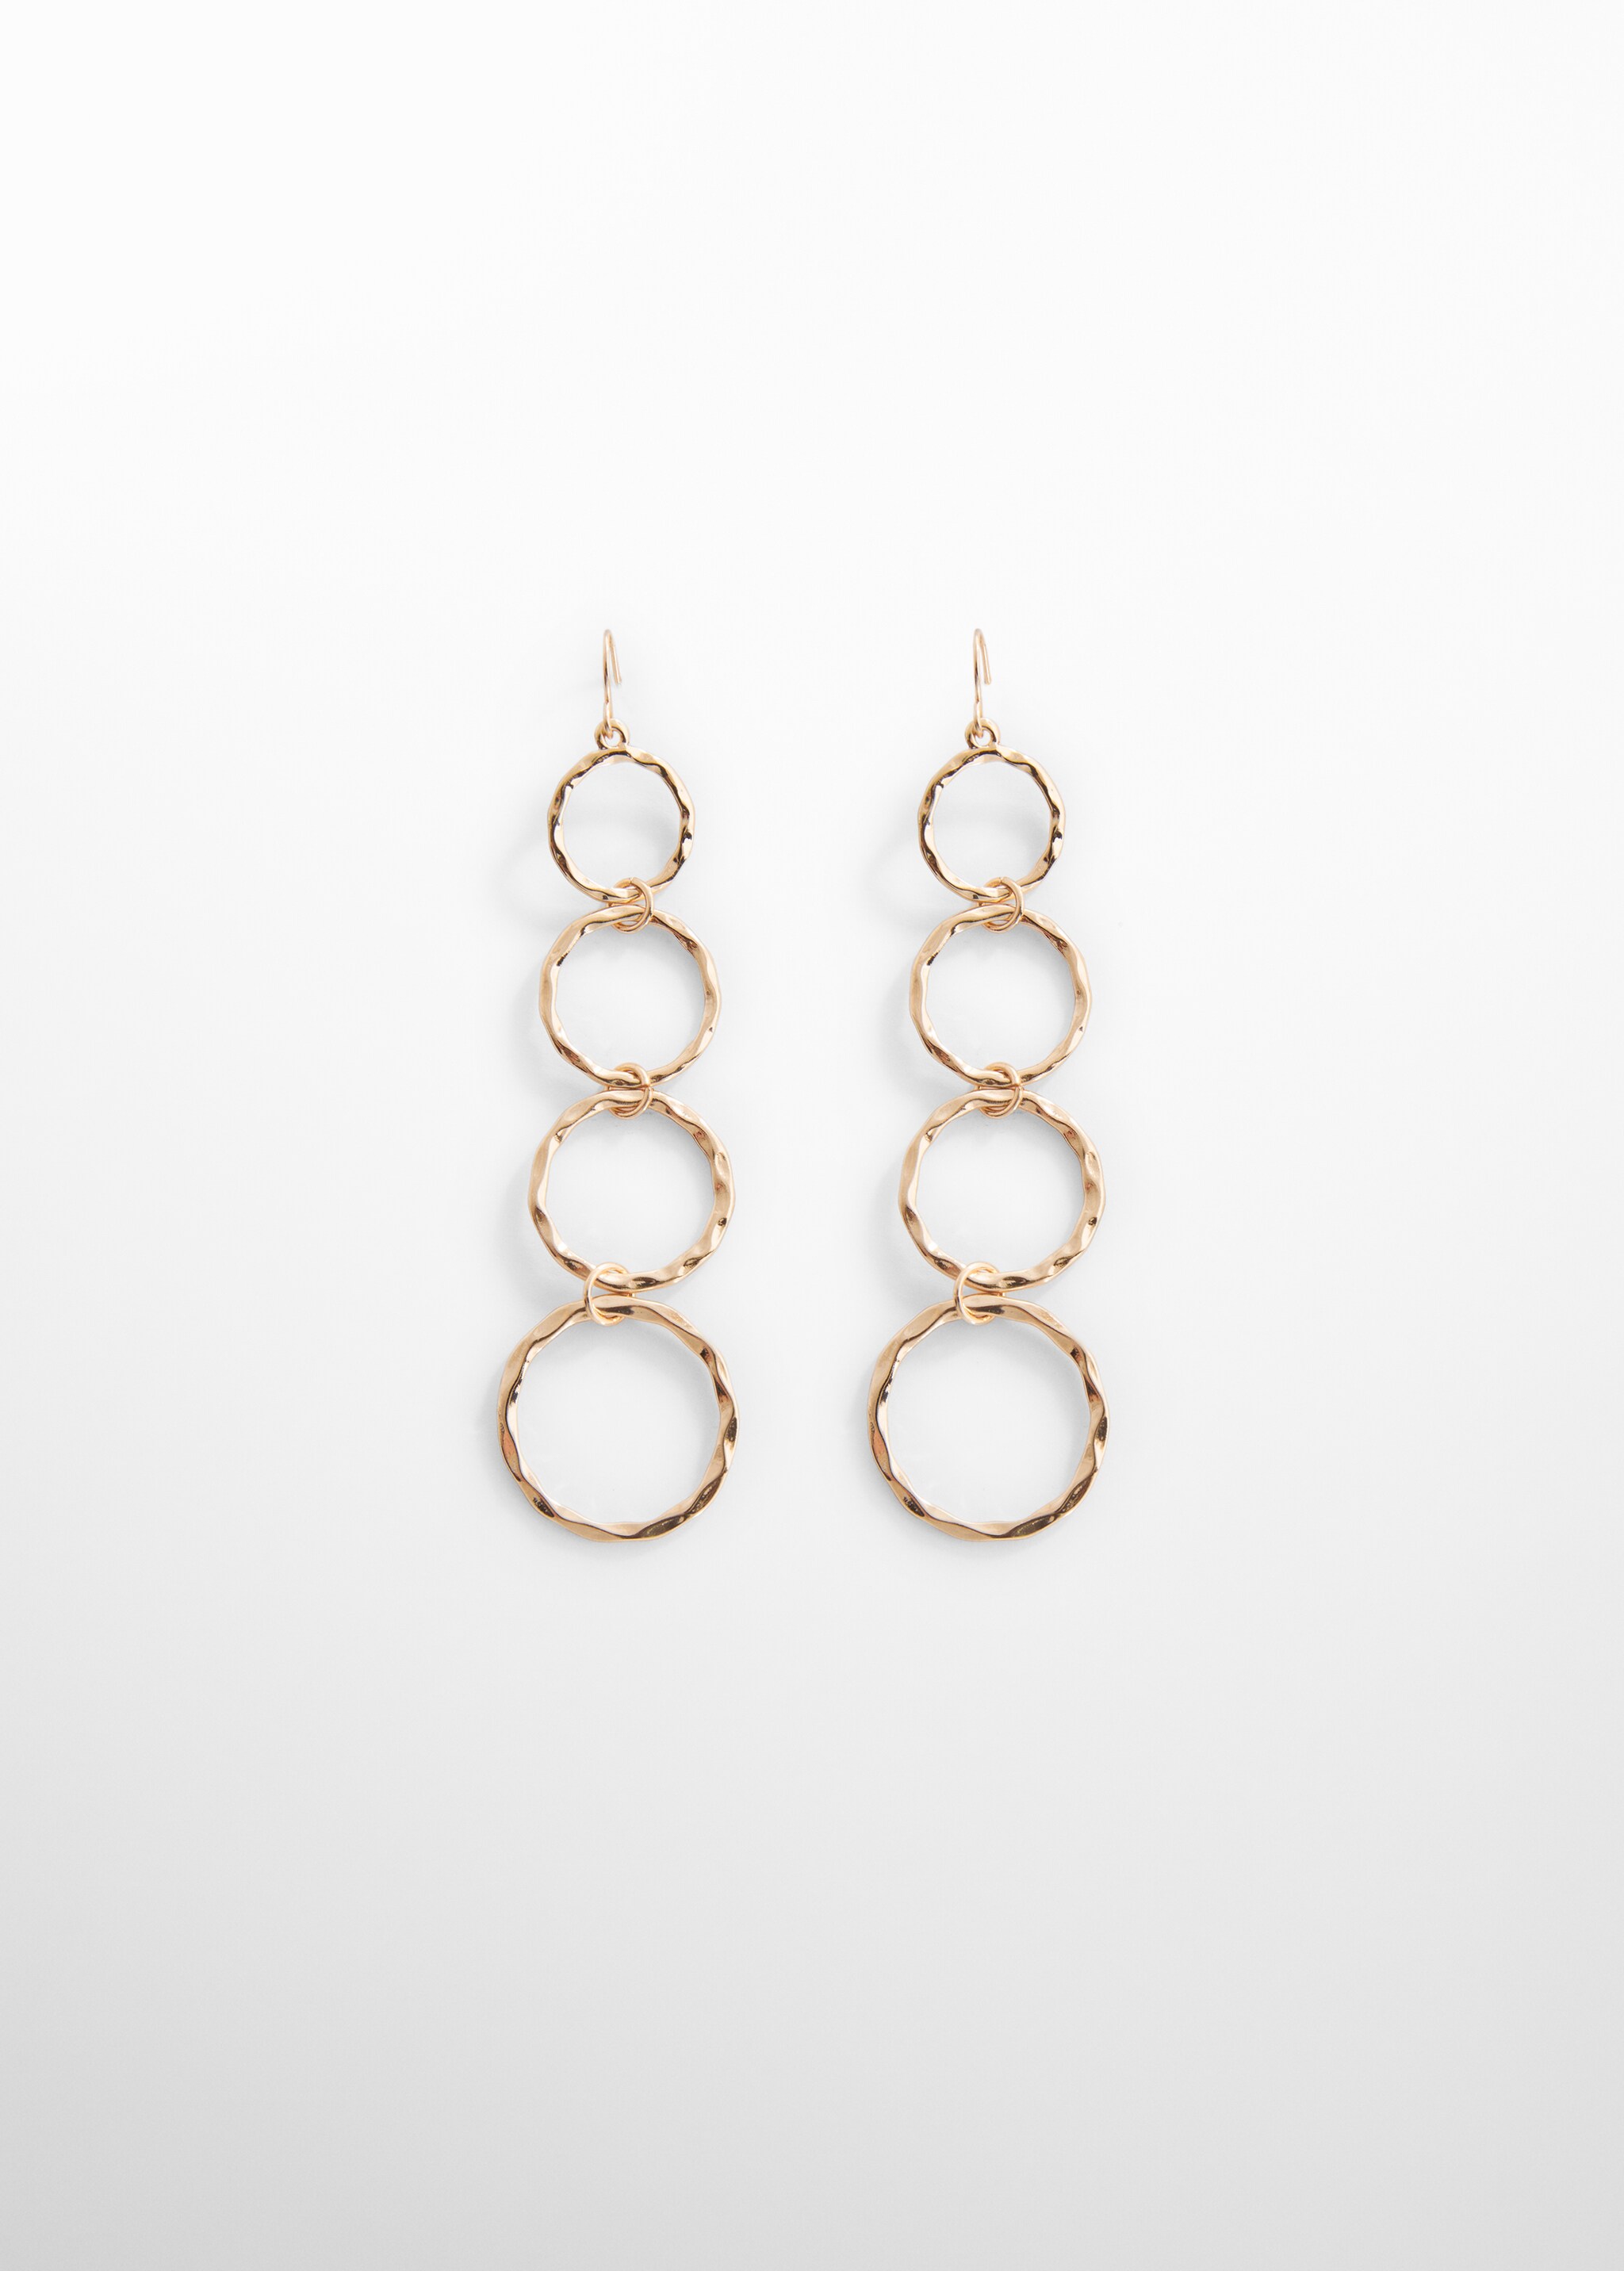 Long circle earrings - Article without model